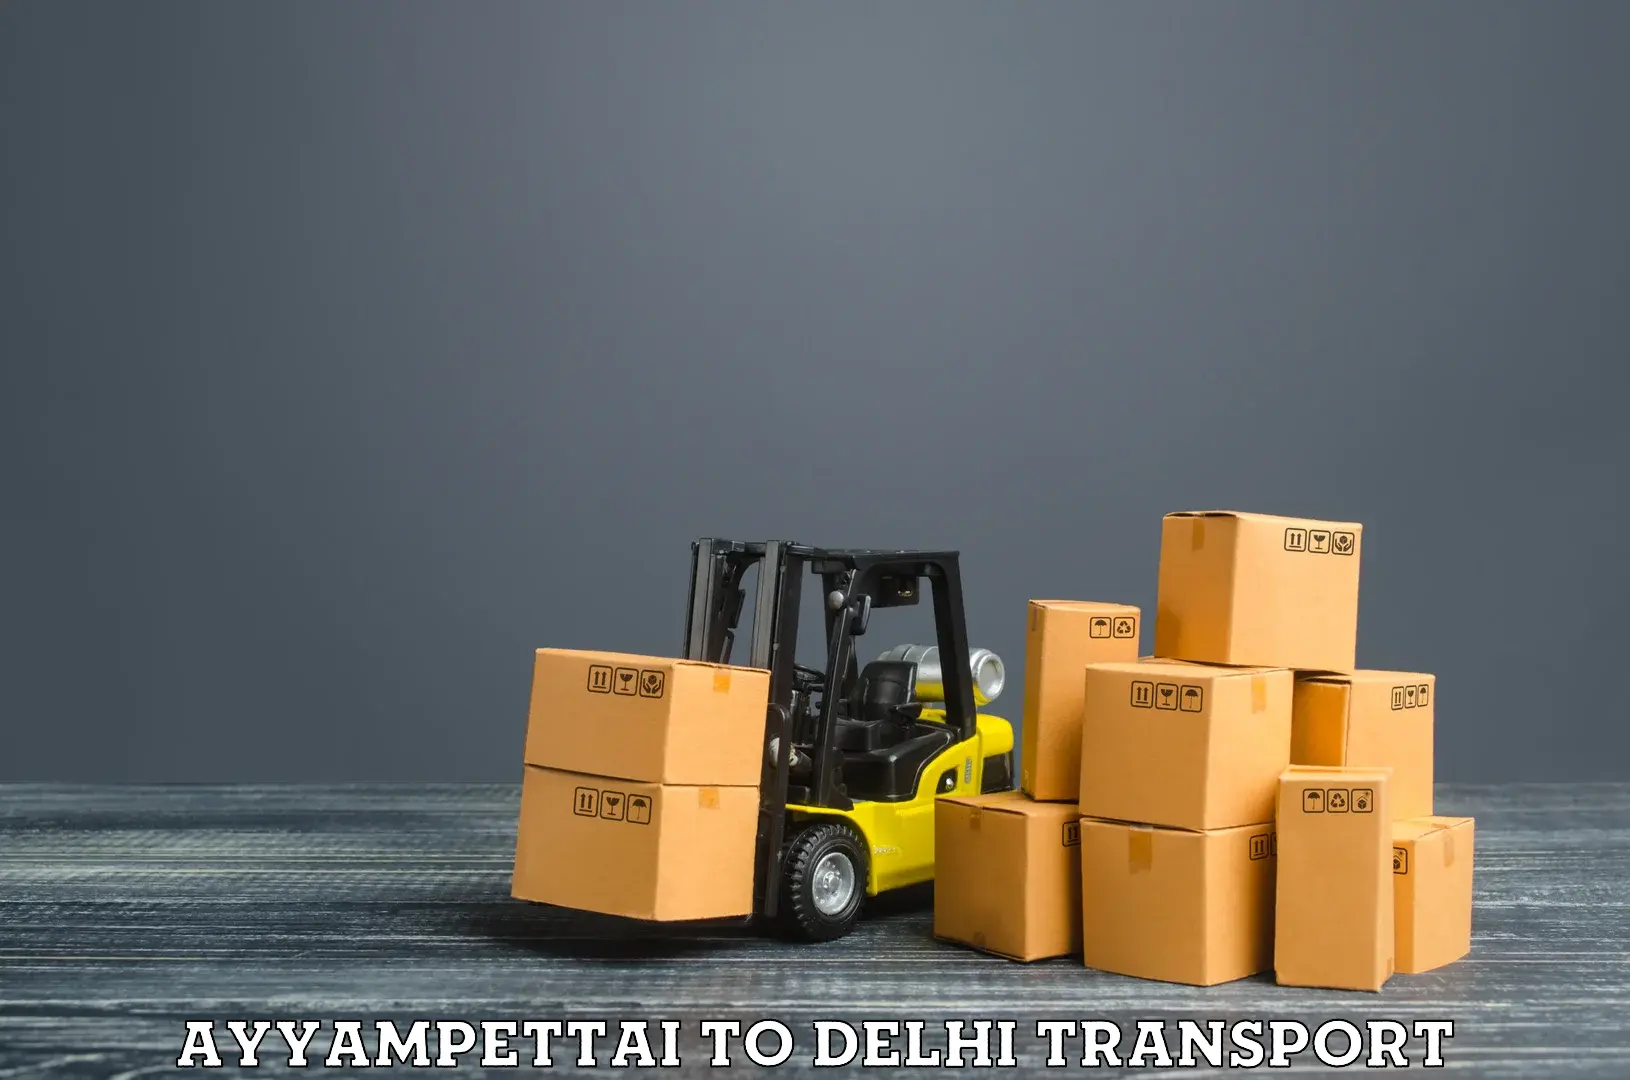 Commercial transport service Ayyampettai to Delhi